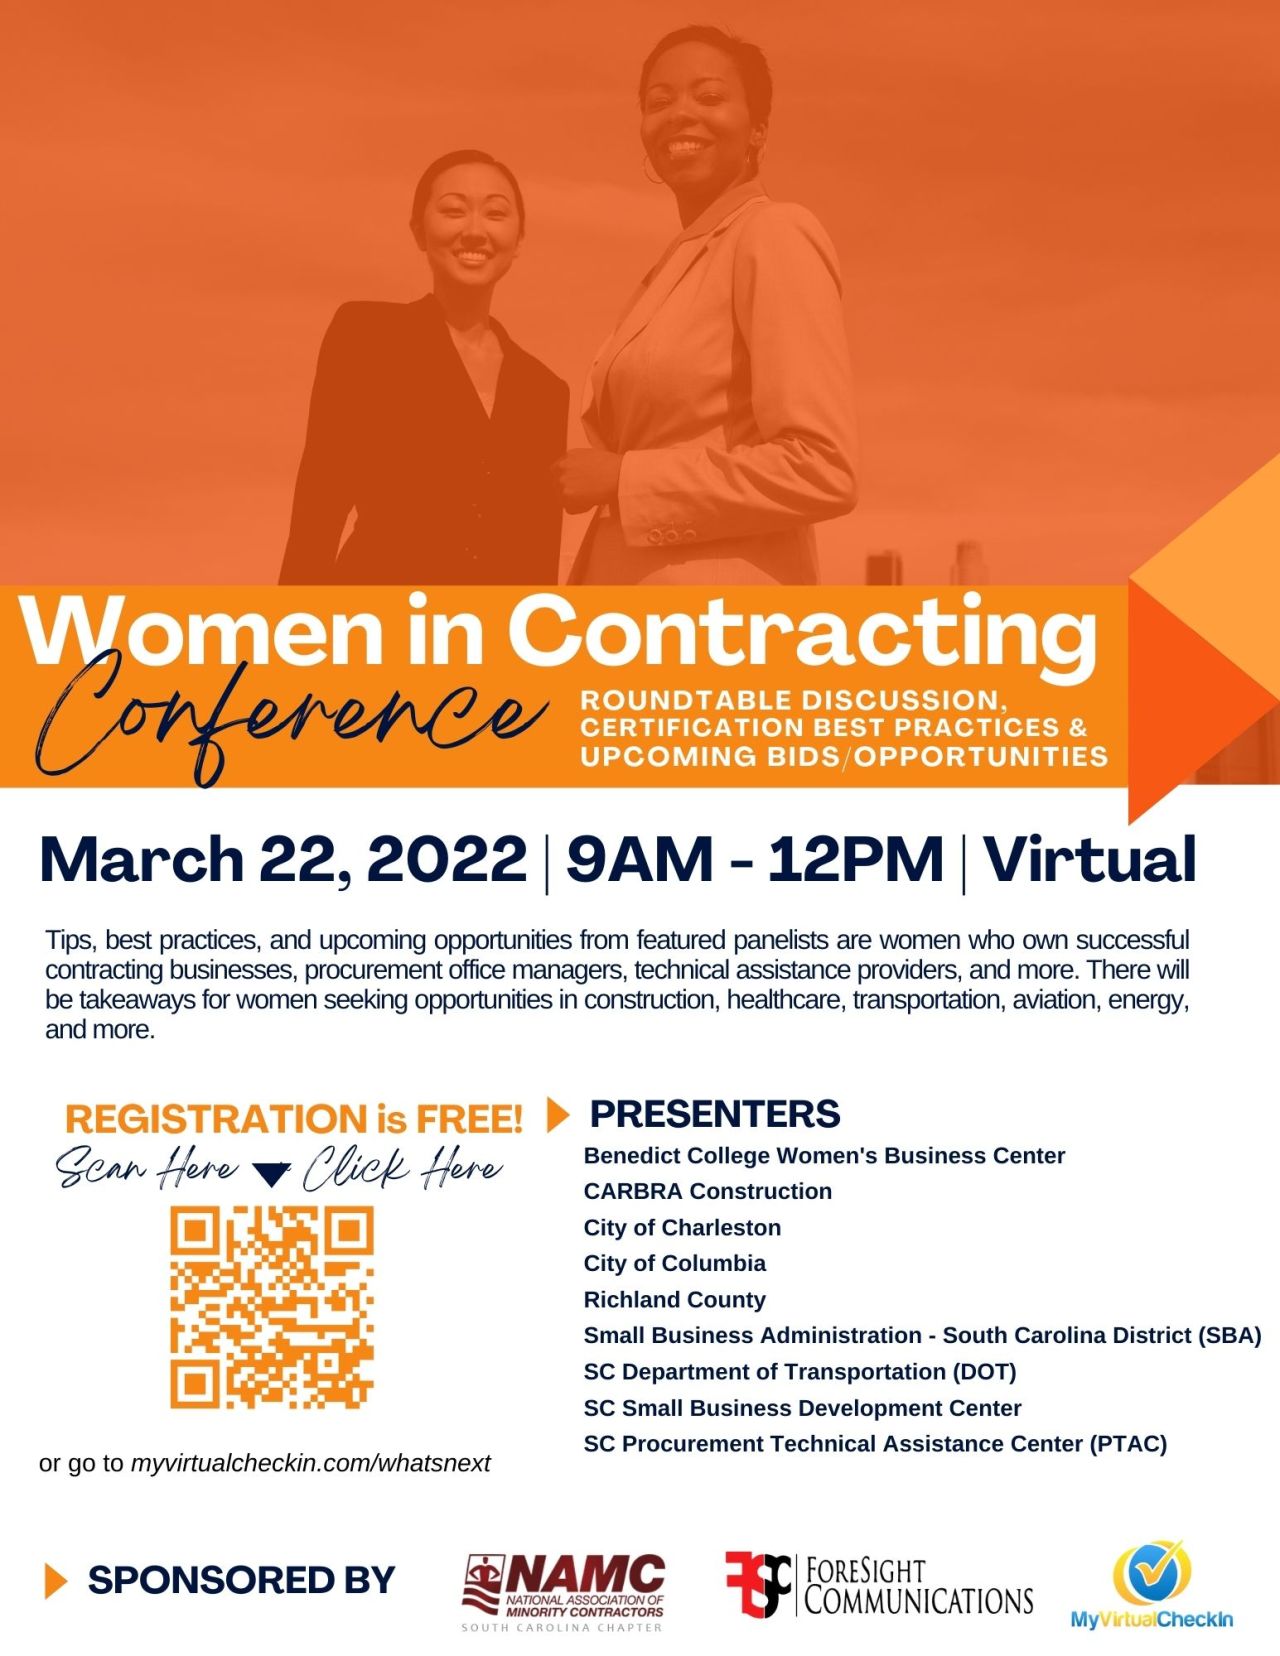 Women in Contracting Conference